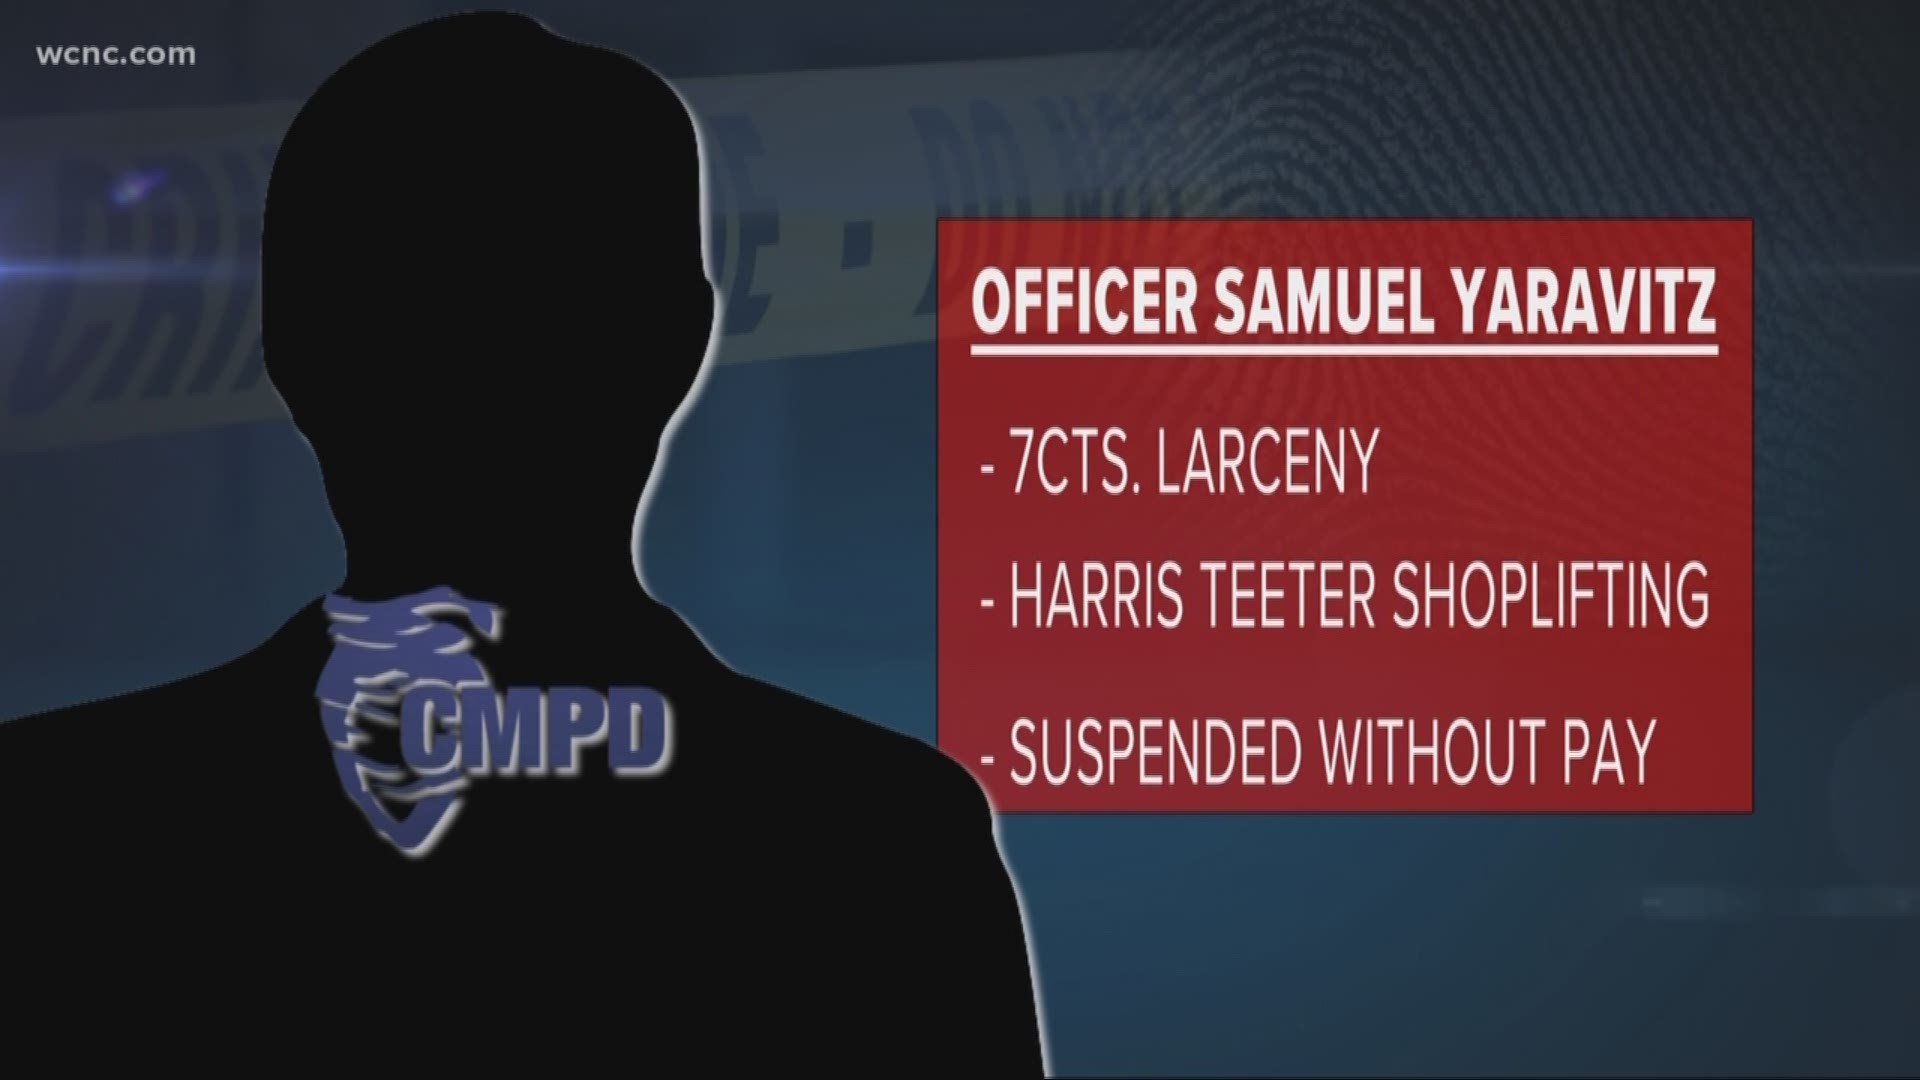 CMPD officer charged with larceny in shoplifting cases